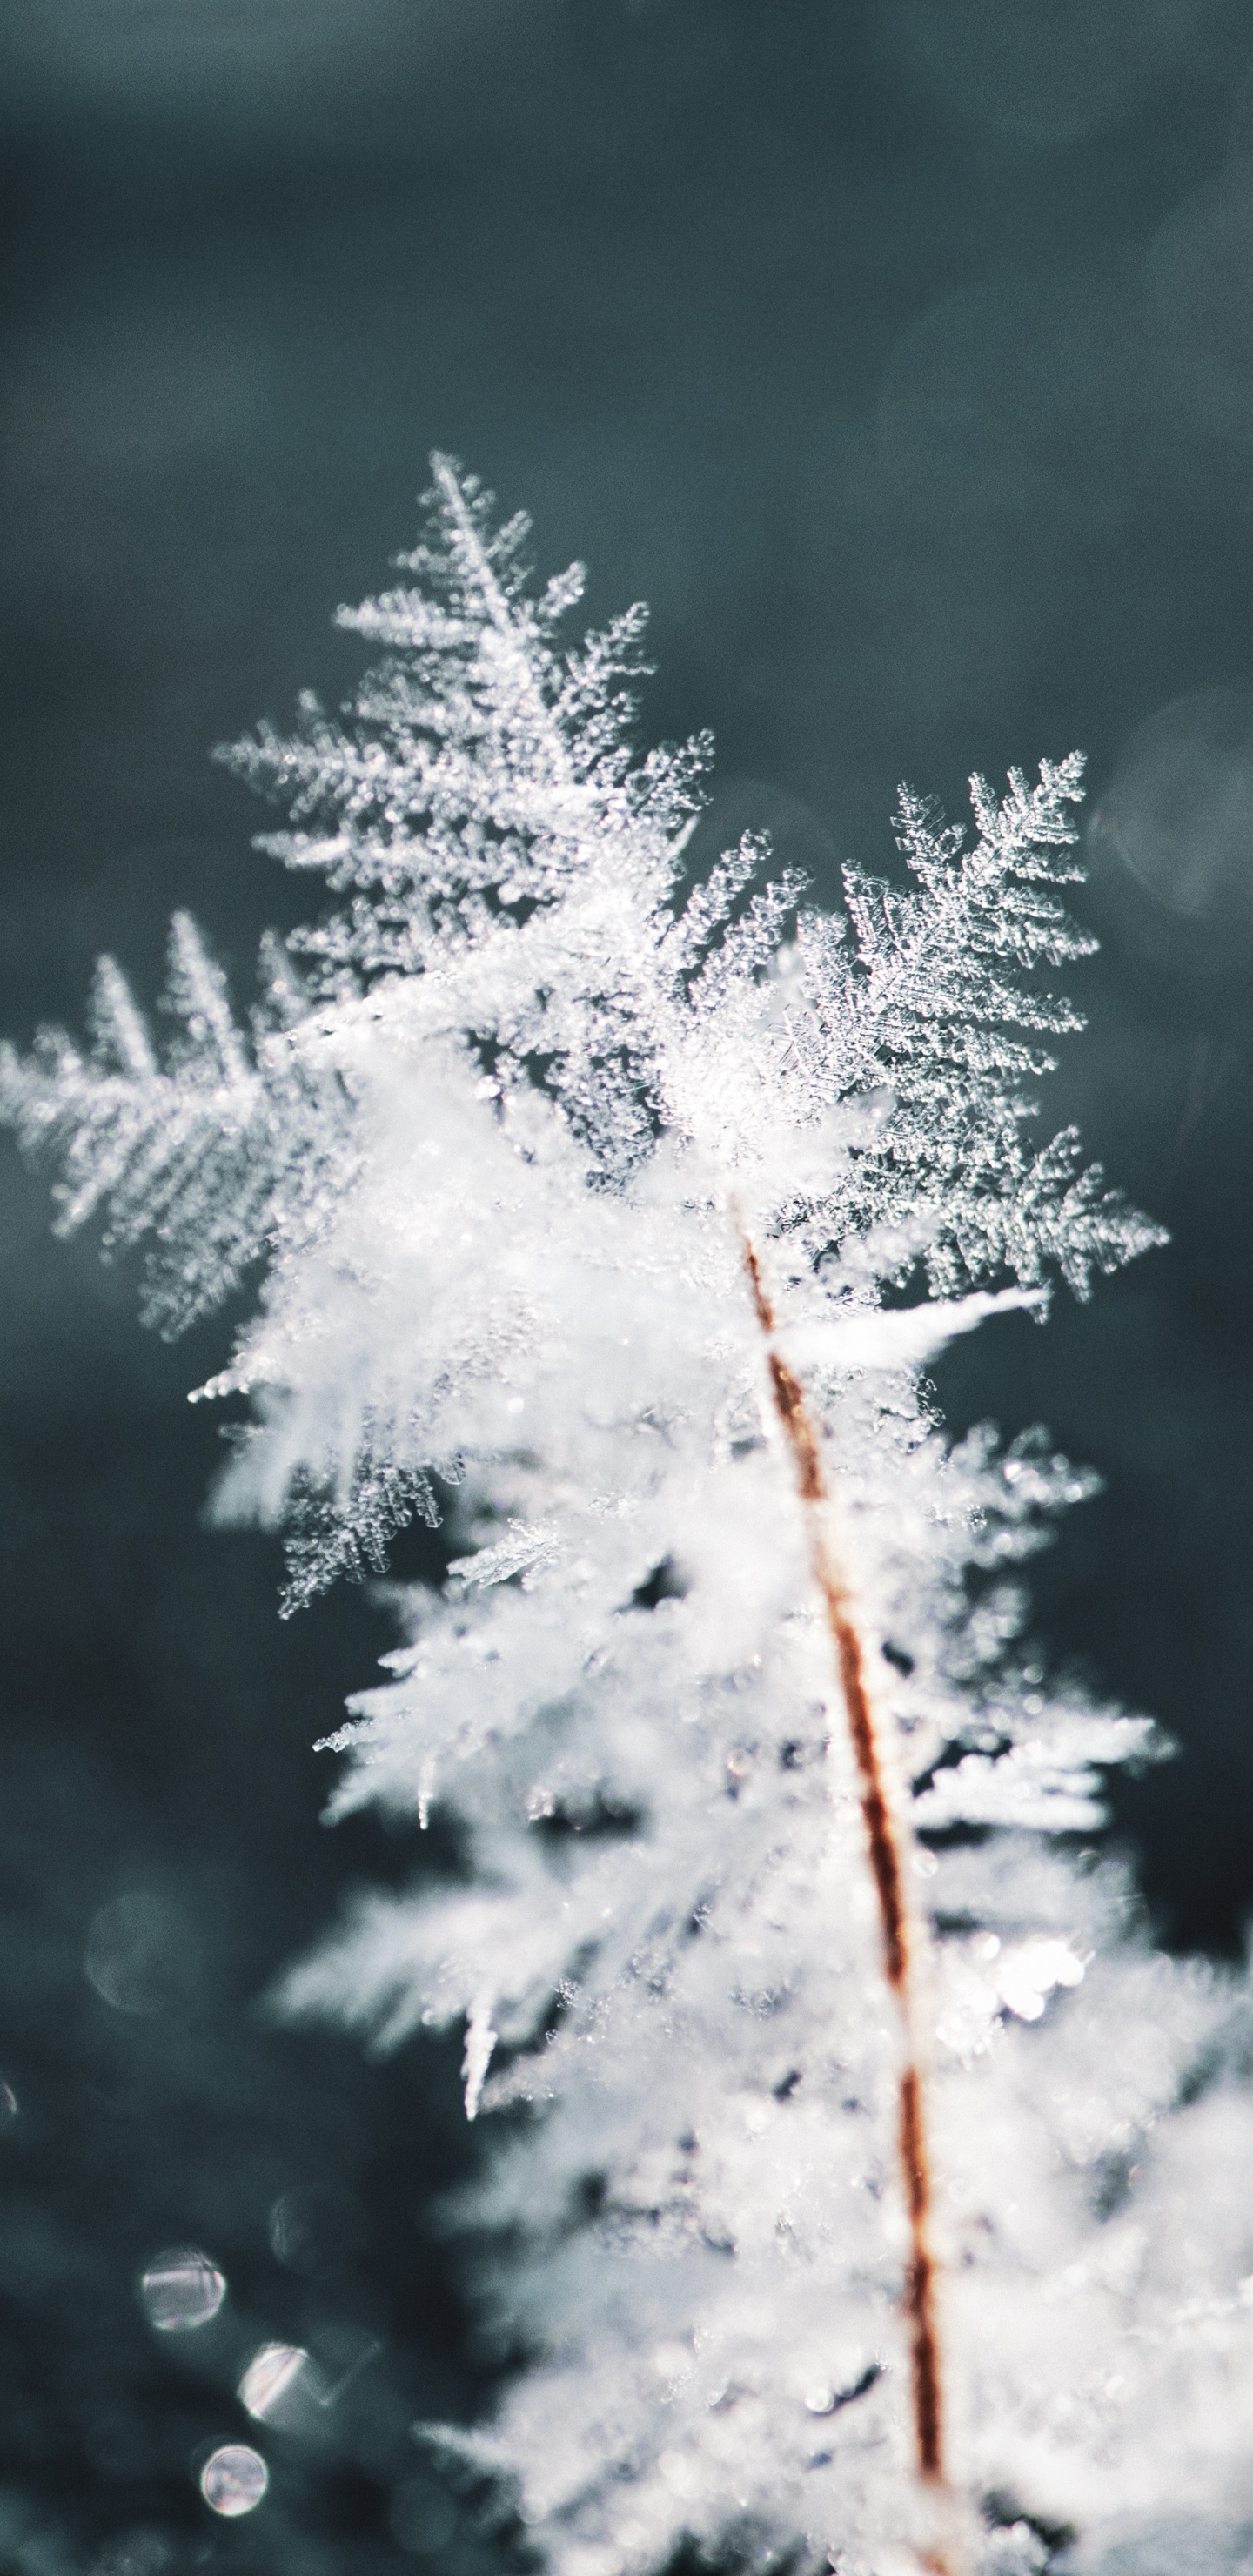 Winter, Snow, Frost, Freezing, Branch. Wallpaper in 1440x2960 Resolution